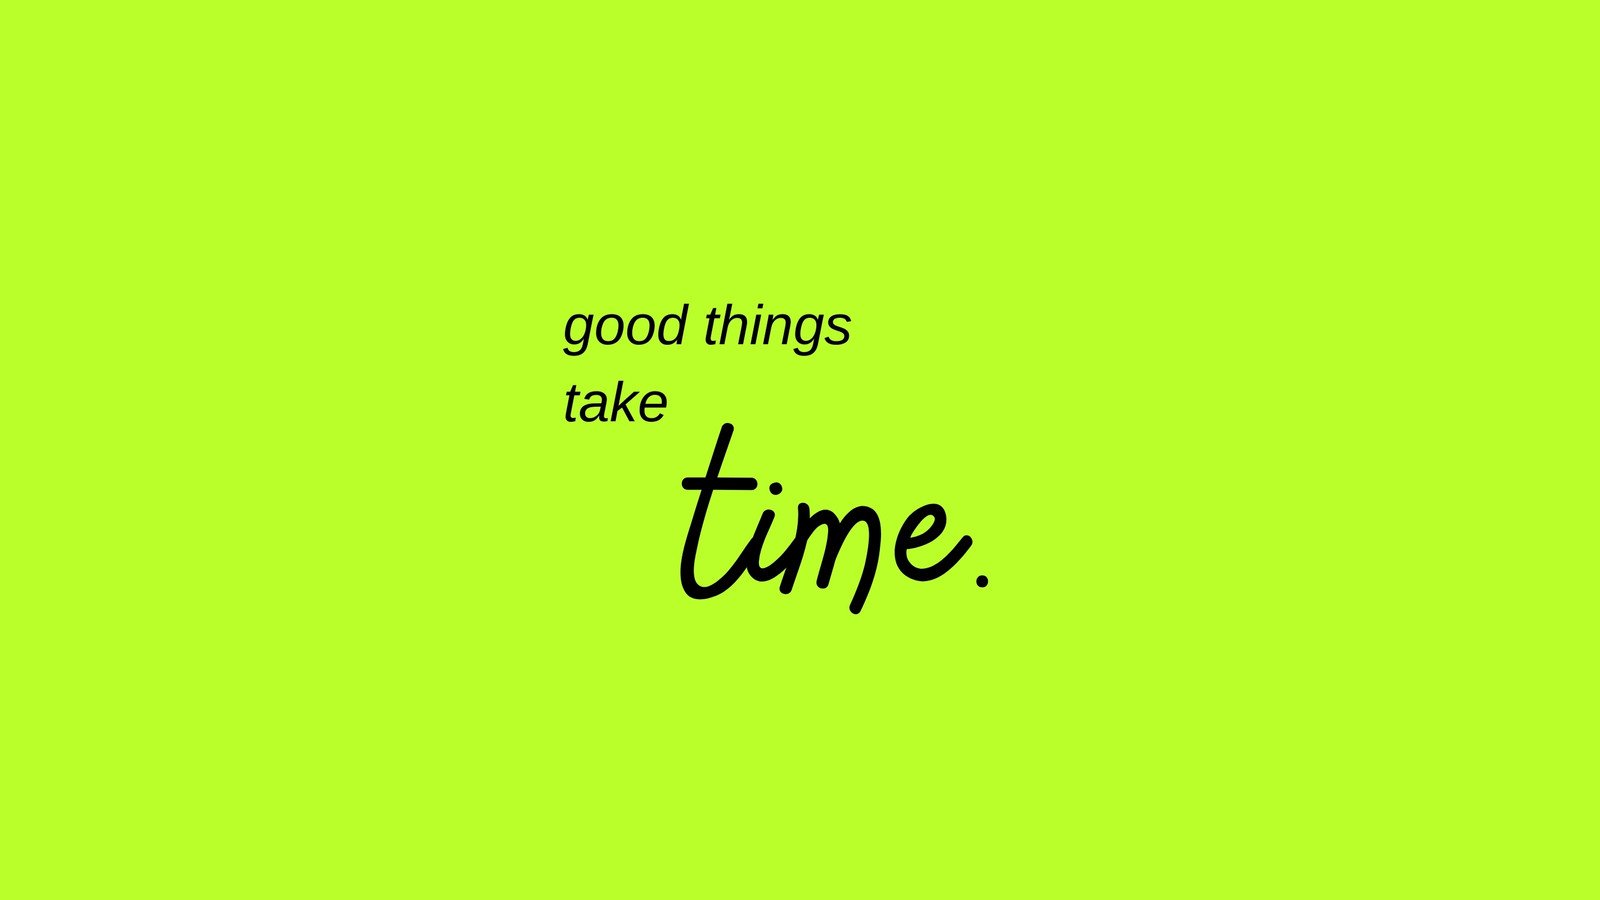 Motivational Good Things Take Time wall poster wallpaper 12 X 18 Inches  Paper Print  Quotes  Motivation posters in India  Buy art film design  movie music nature and educational paintingswallpapers